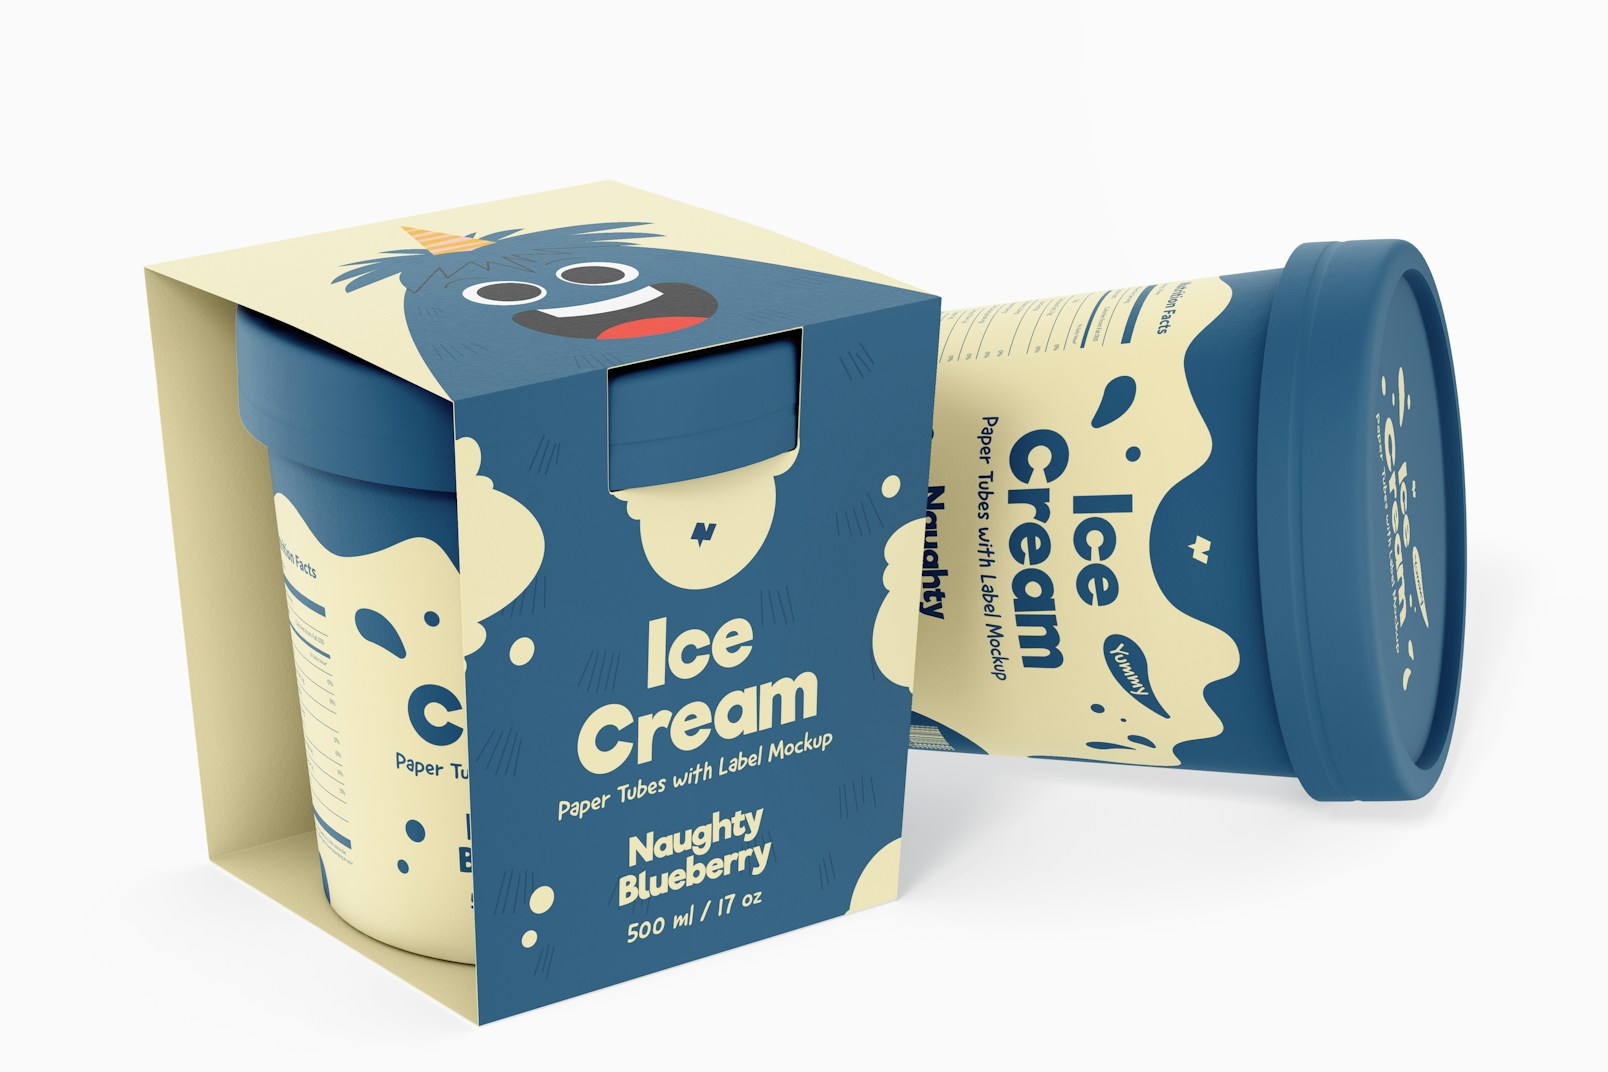 500 ml Ice Cream Paper Tub with Label Mockup, Standing and Dropped